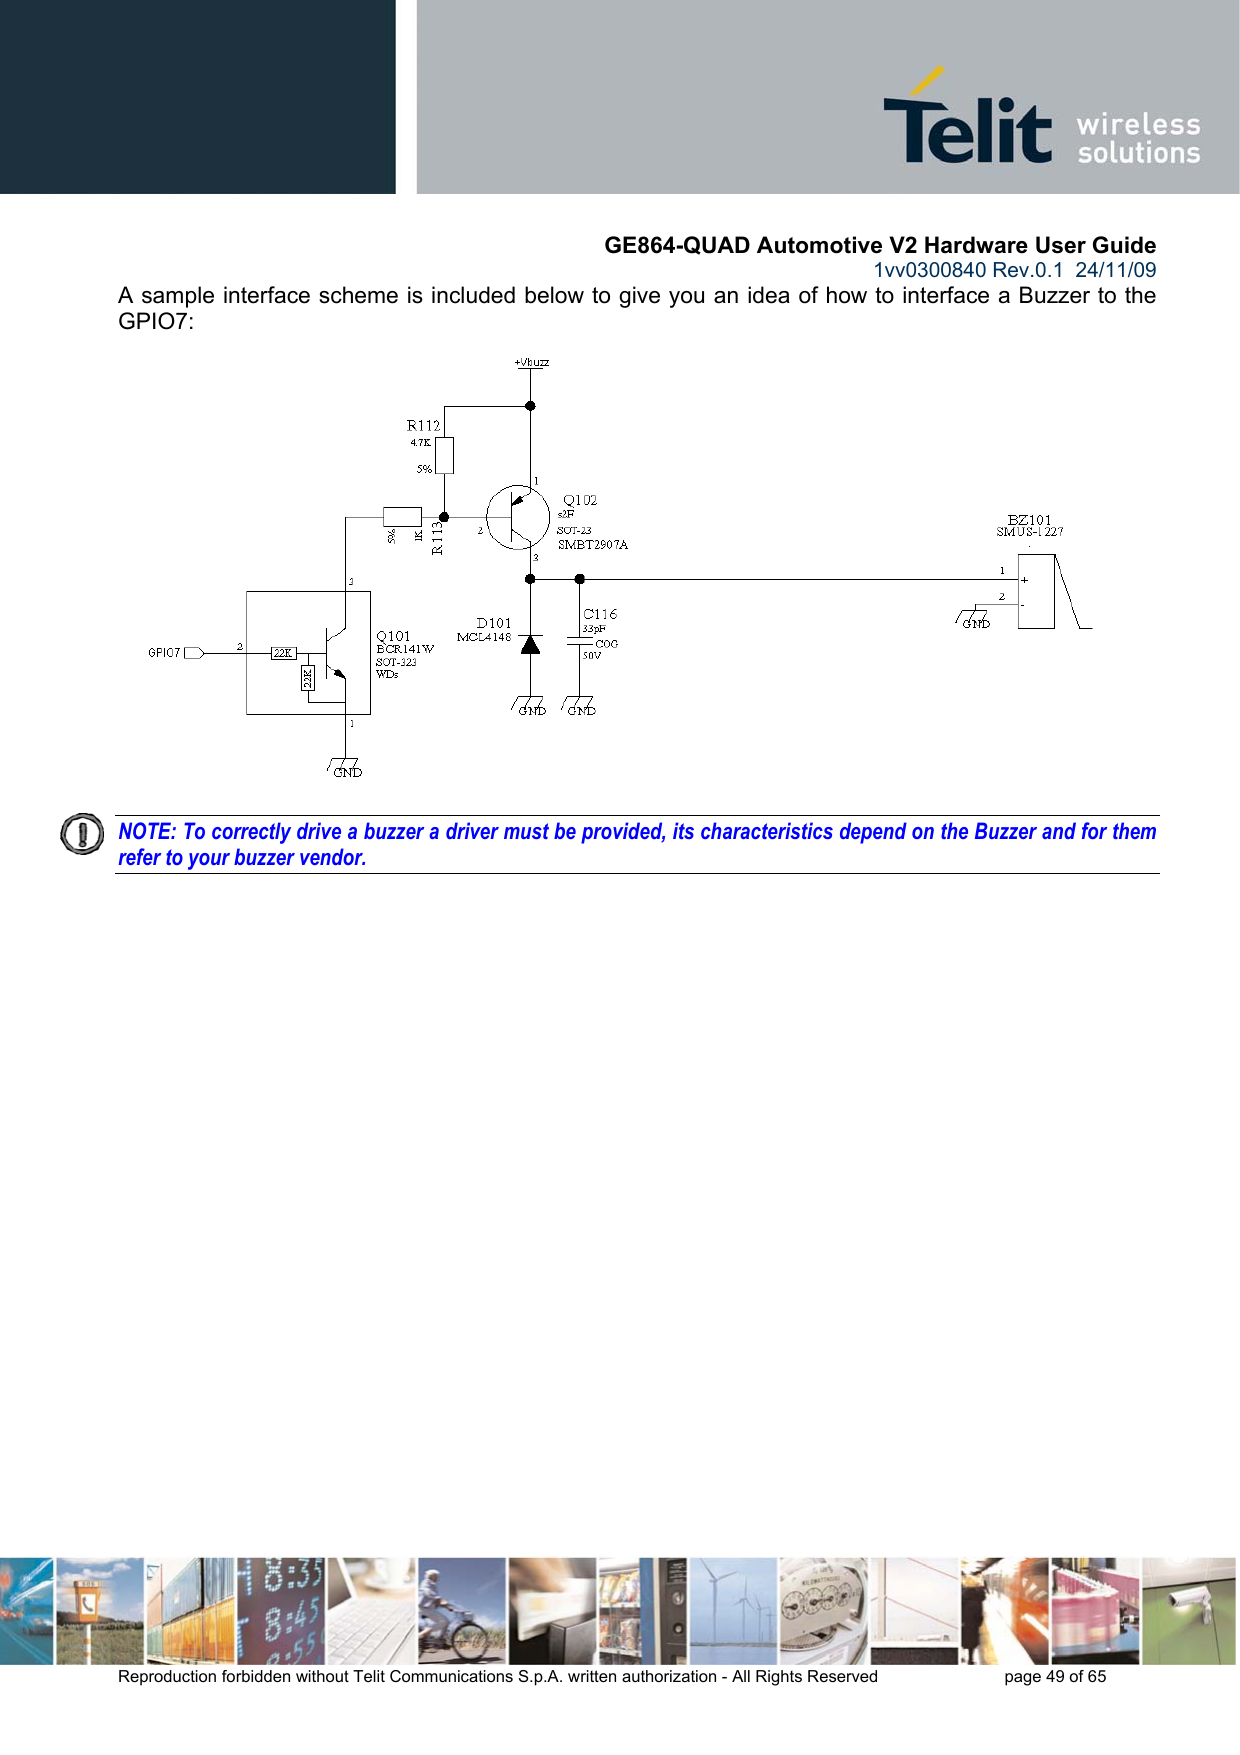       GE864-QUAD Automotive V2 Hardware User Guide 1vv0300840 Rev.0.1  24/11/09      Reproduction forbidden without Telit Communications S.p.A. written authorization - All Rights Reserved    page 49 of 65  A sample interface scheme is included below to give you an idea of how to interface a Buzzer to the GPIO7:  NOTE: To correctly drive a buzzer a driver must be provided, its characteristics depend on the Buzzer and for them refer to your buzzer vendor.   